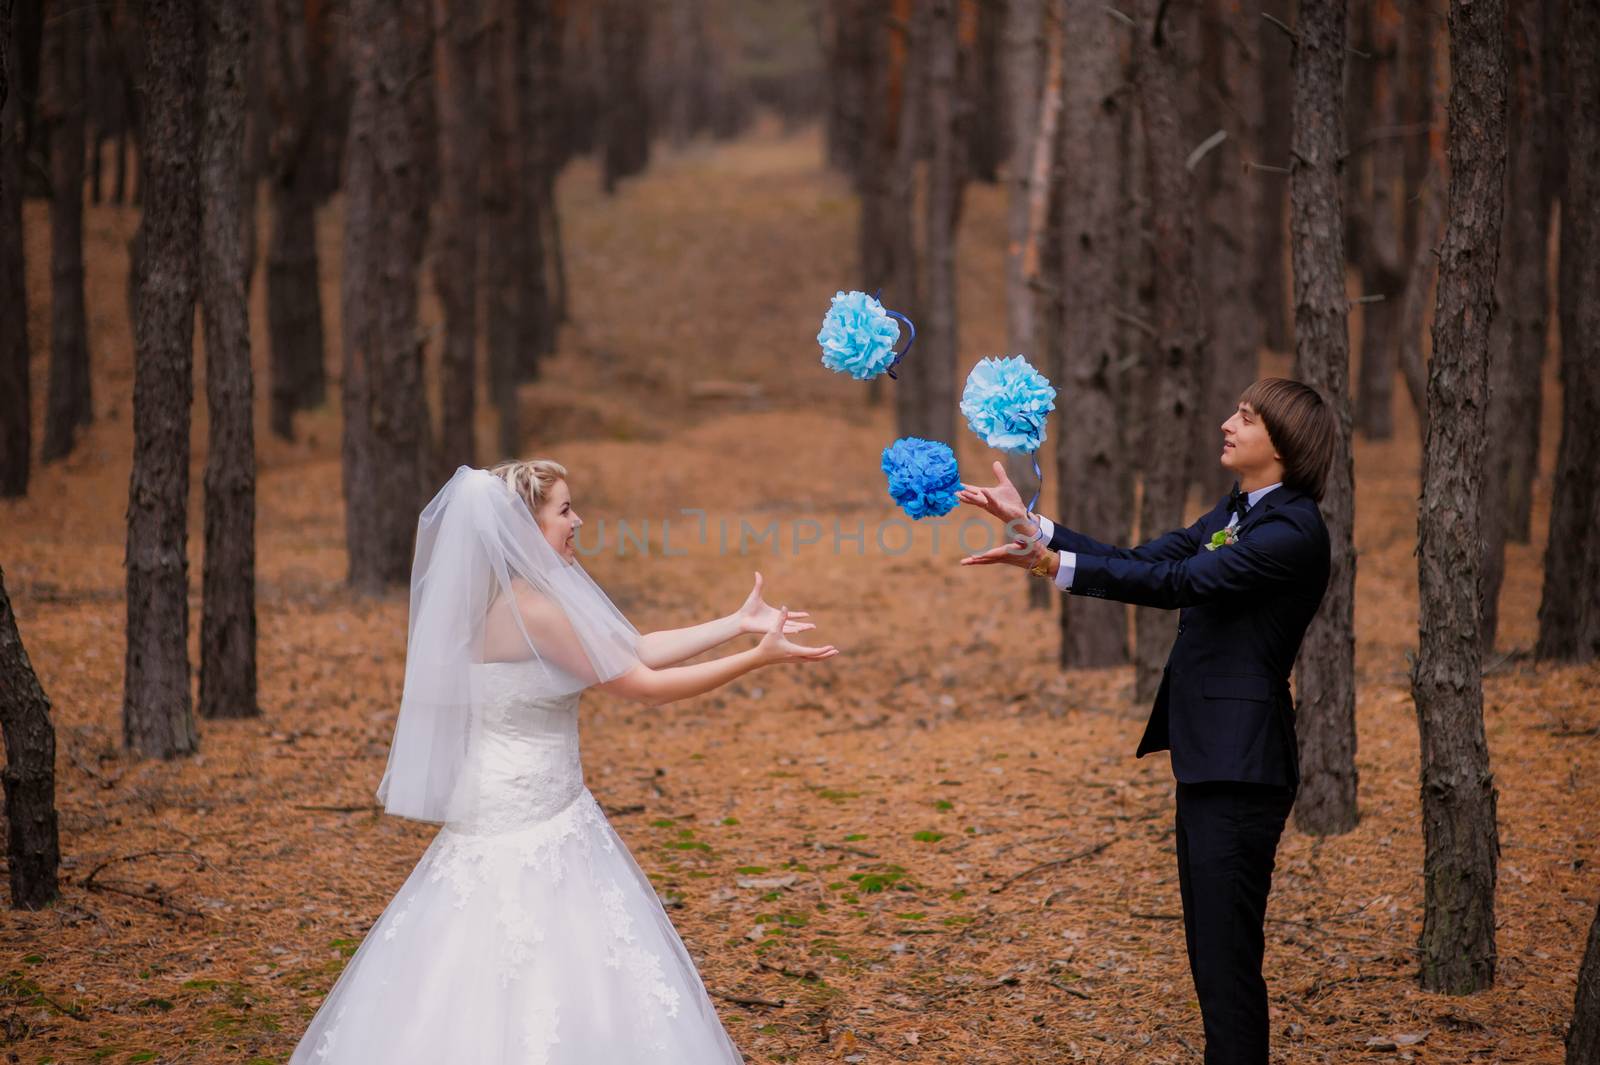 happy bride and groom walking in the autumn forest.